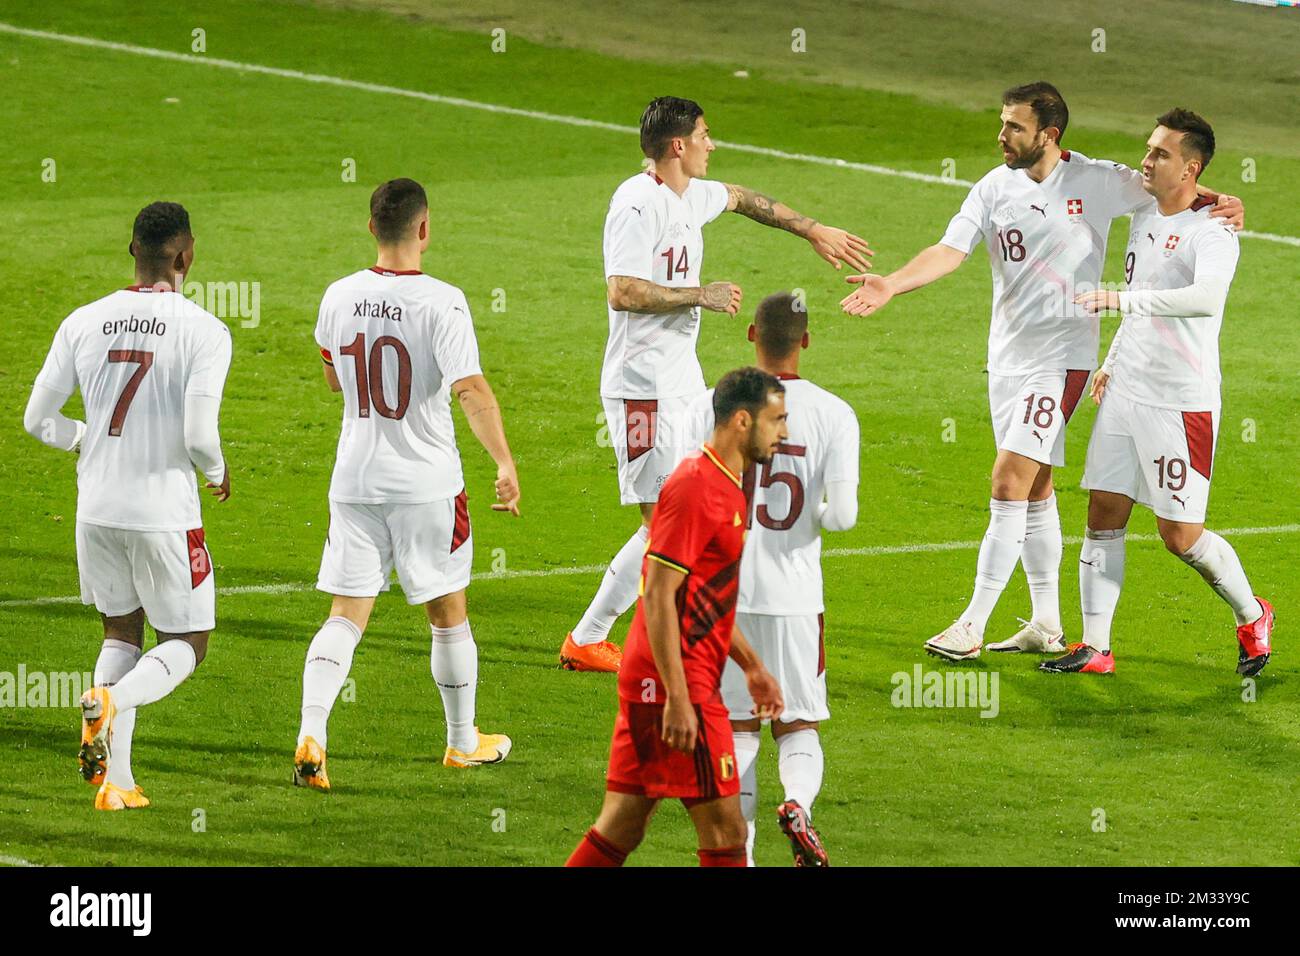 Swiss Admir Mehmedi celebrates after scoring during a friendly soccer game between the Belgian national team Red Devils and Switzerland, Wednesday 11 November 2020 in Leuven. BELGA PHOTO BRUNO FAHY Stock Photo